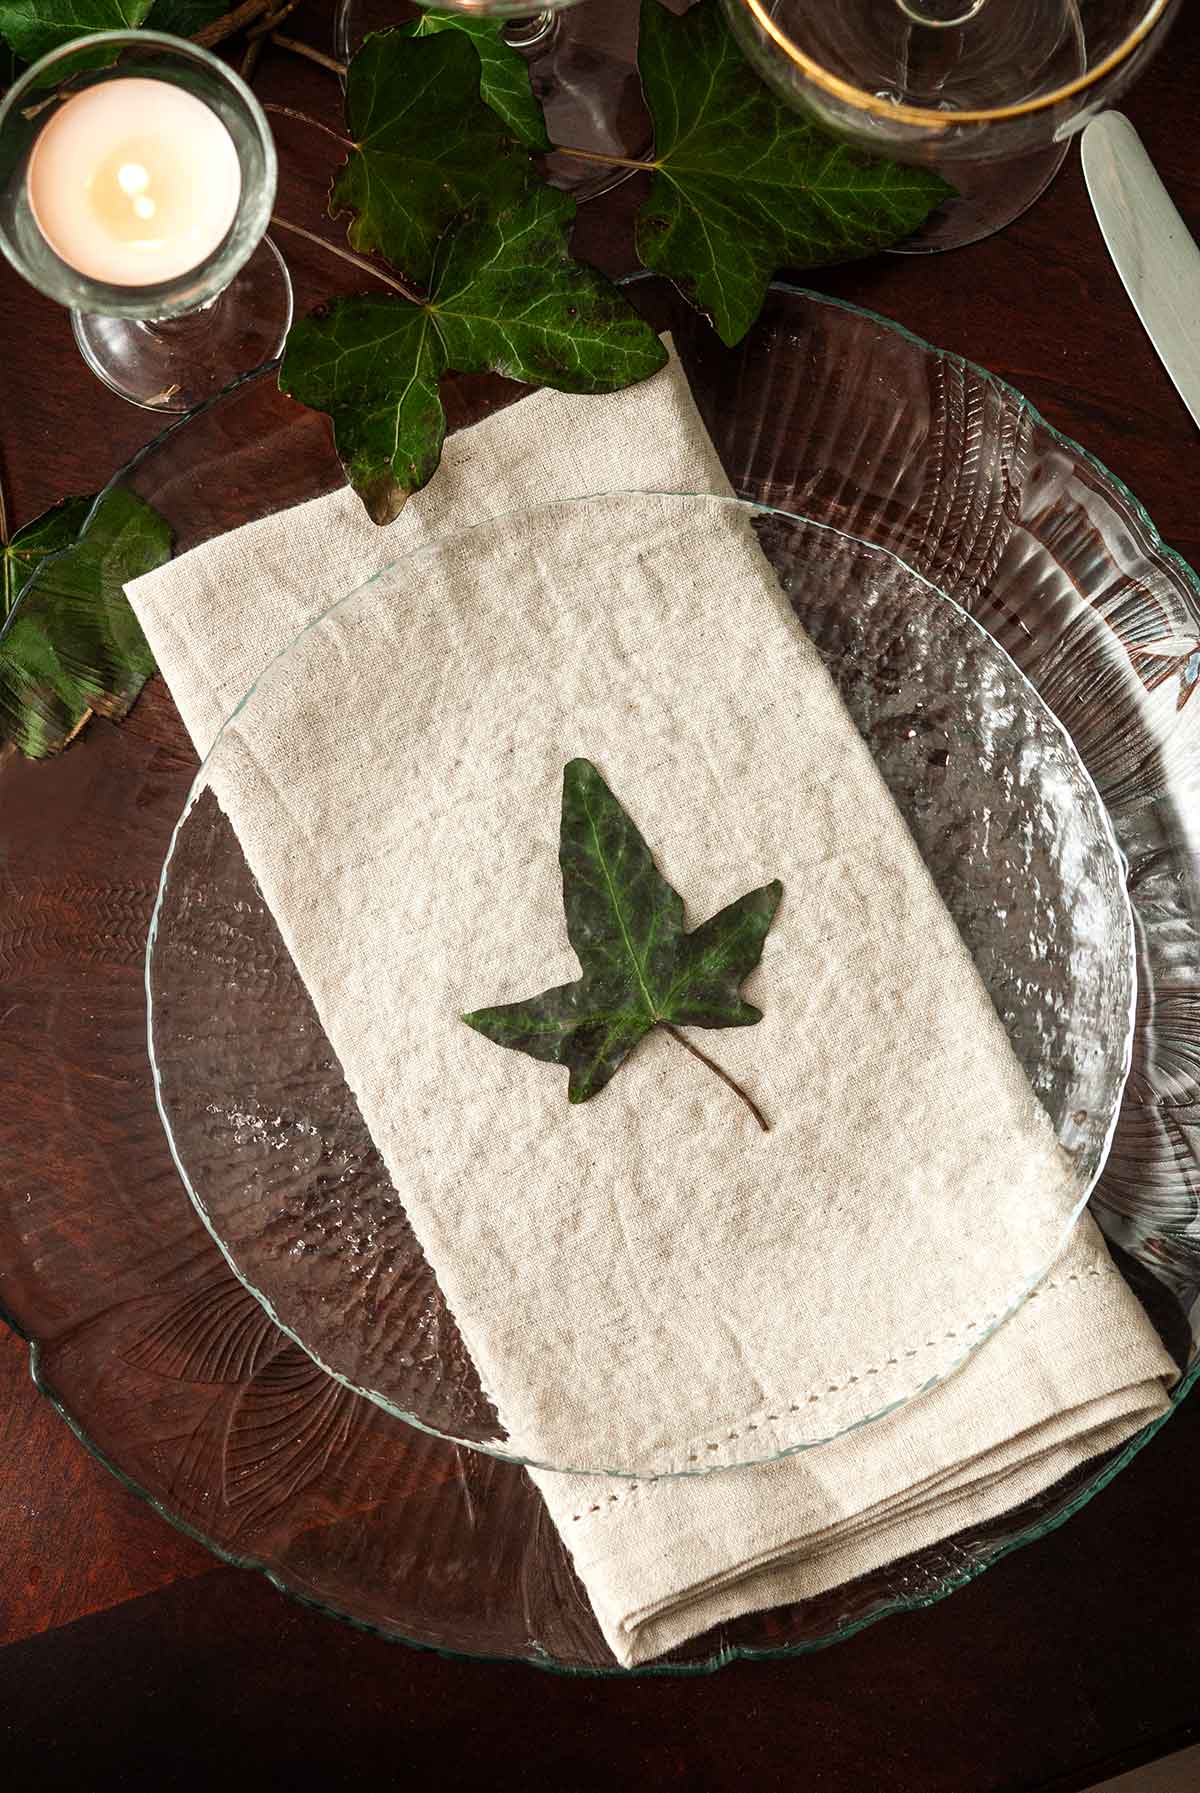 An ivy leaf in the center of a plate on top of a napkin on a table with ivy.